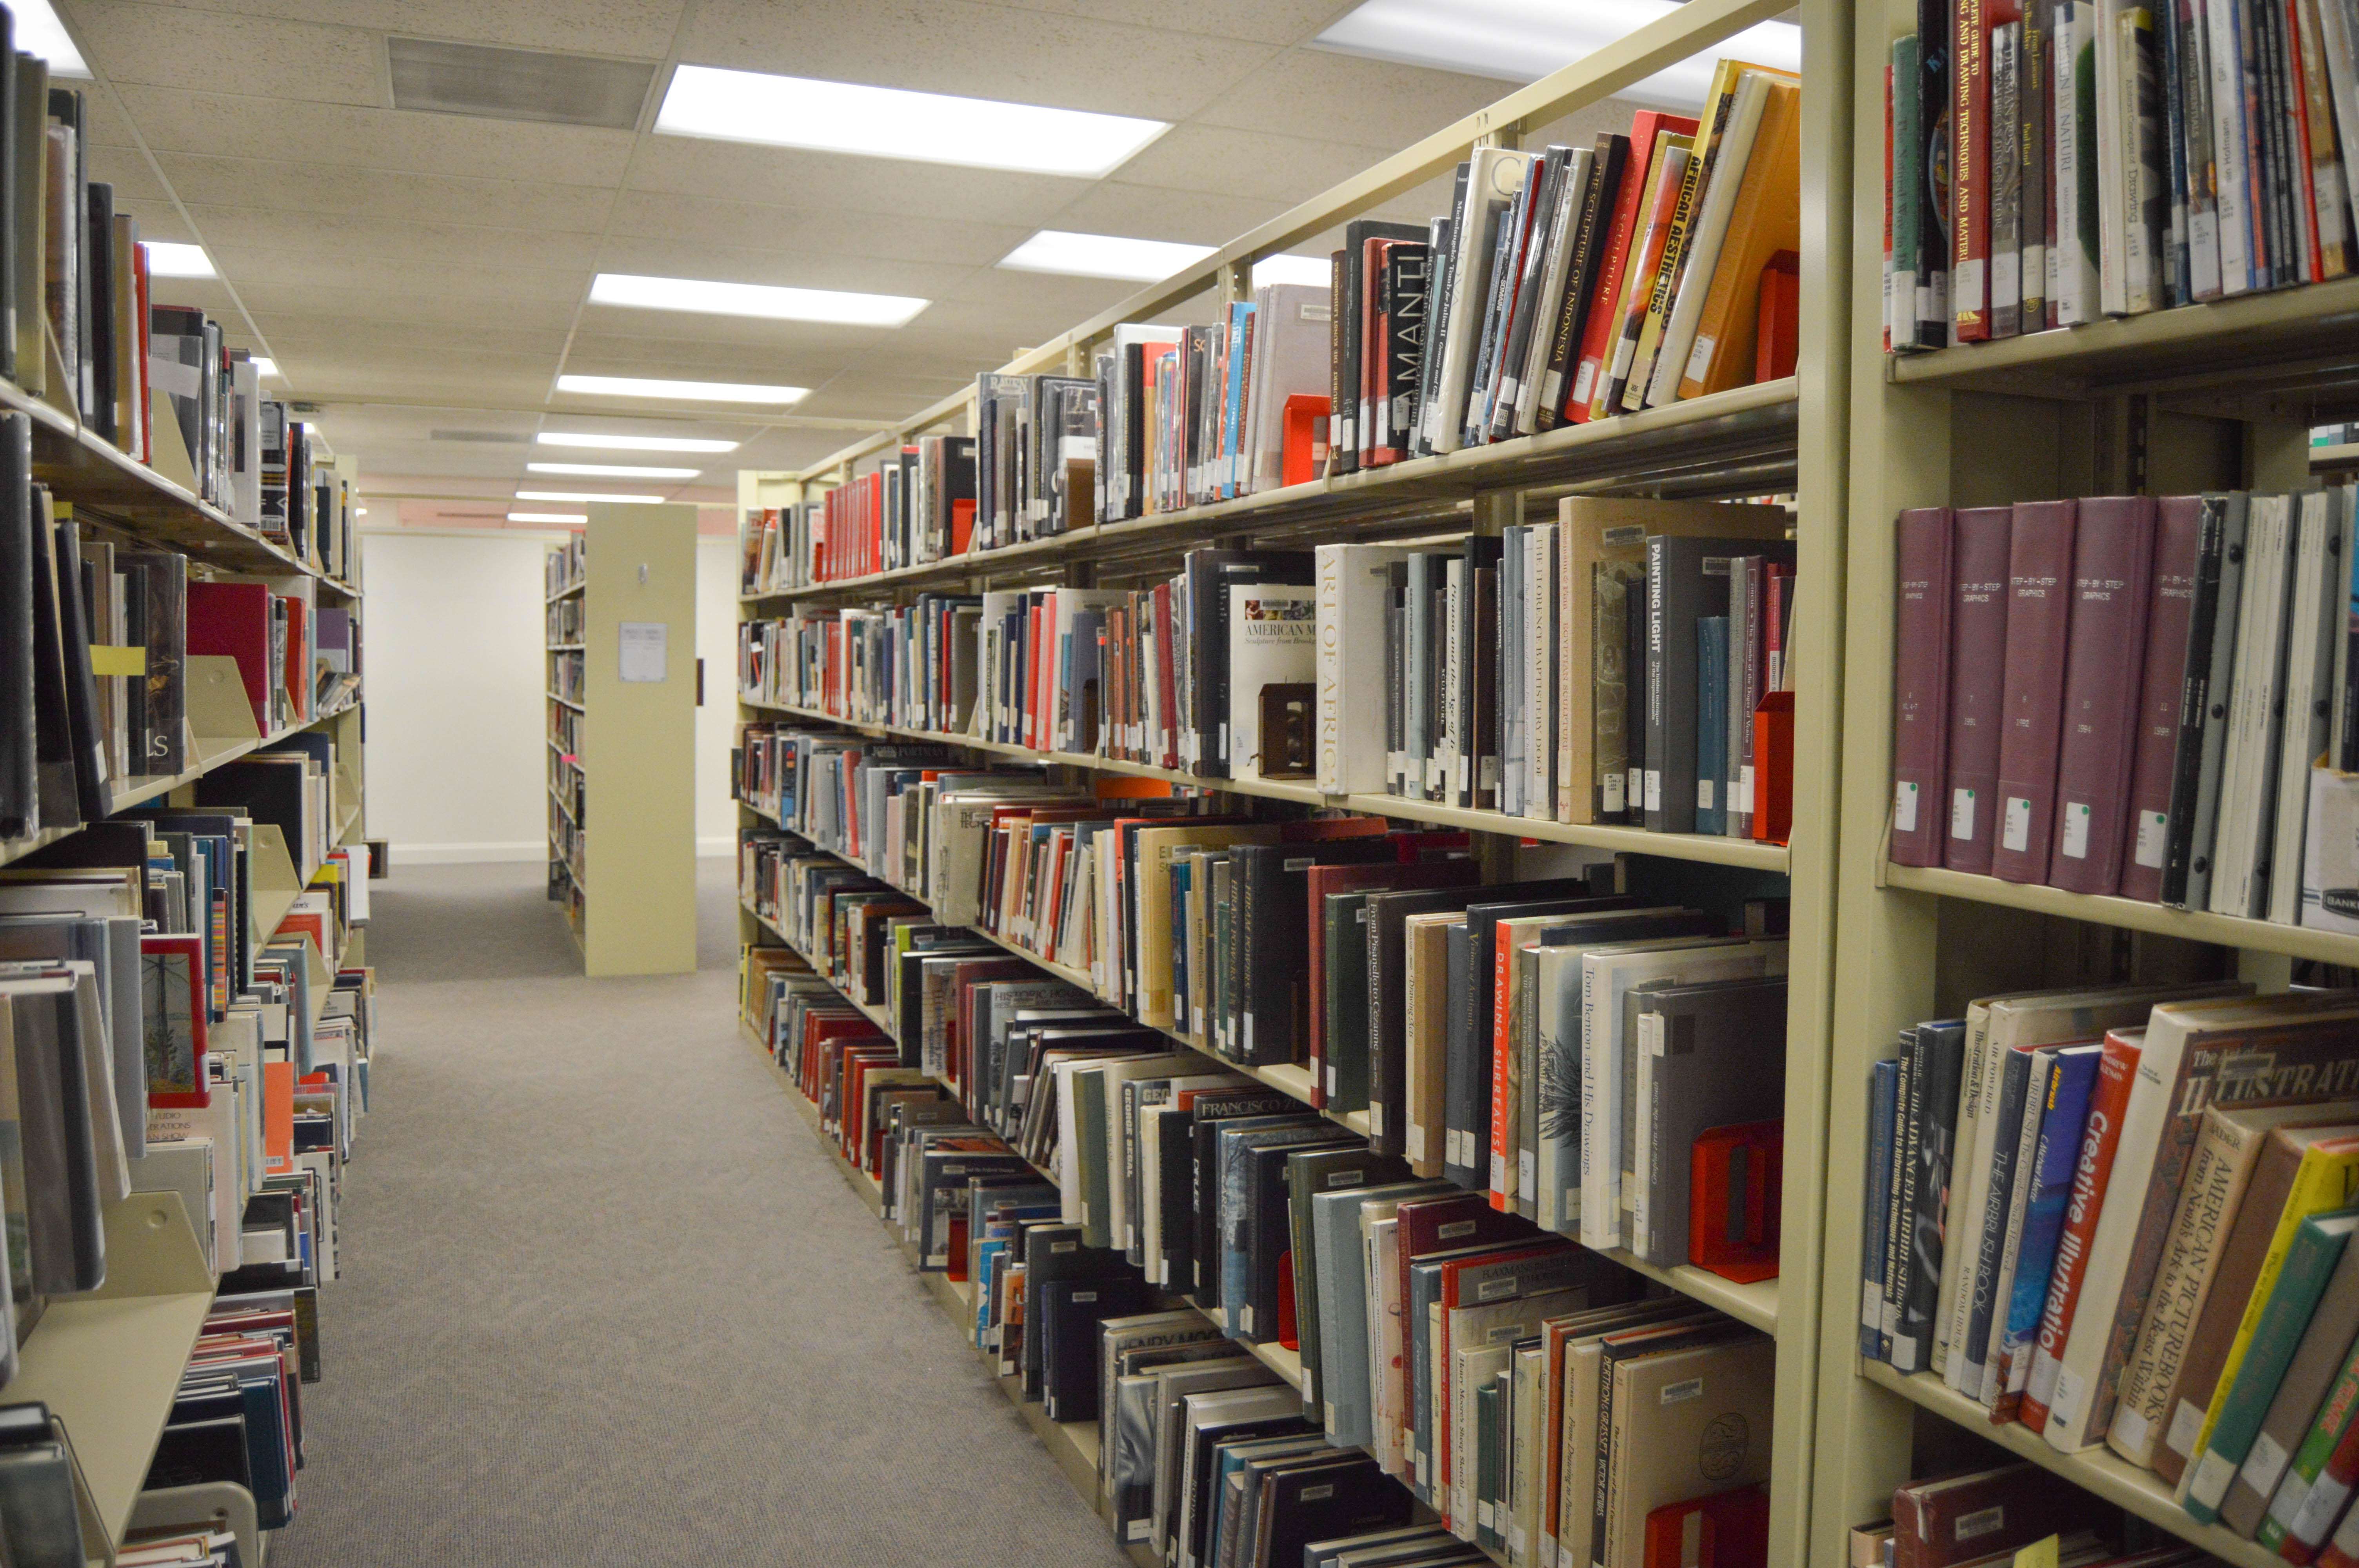 KSU library strives for open access to research